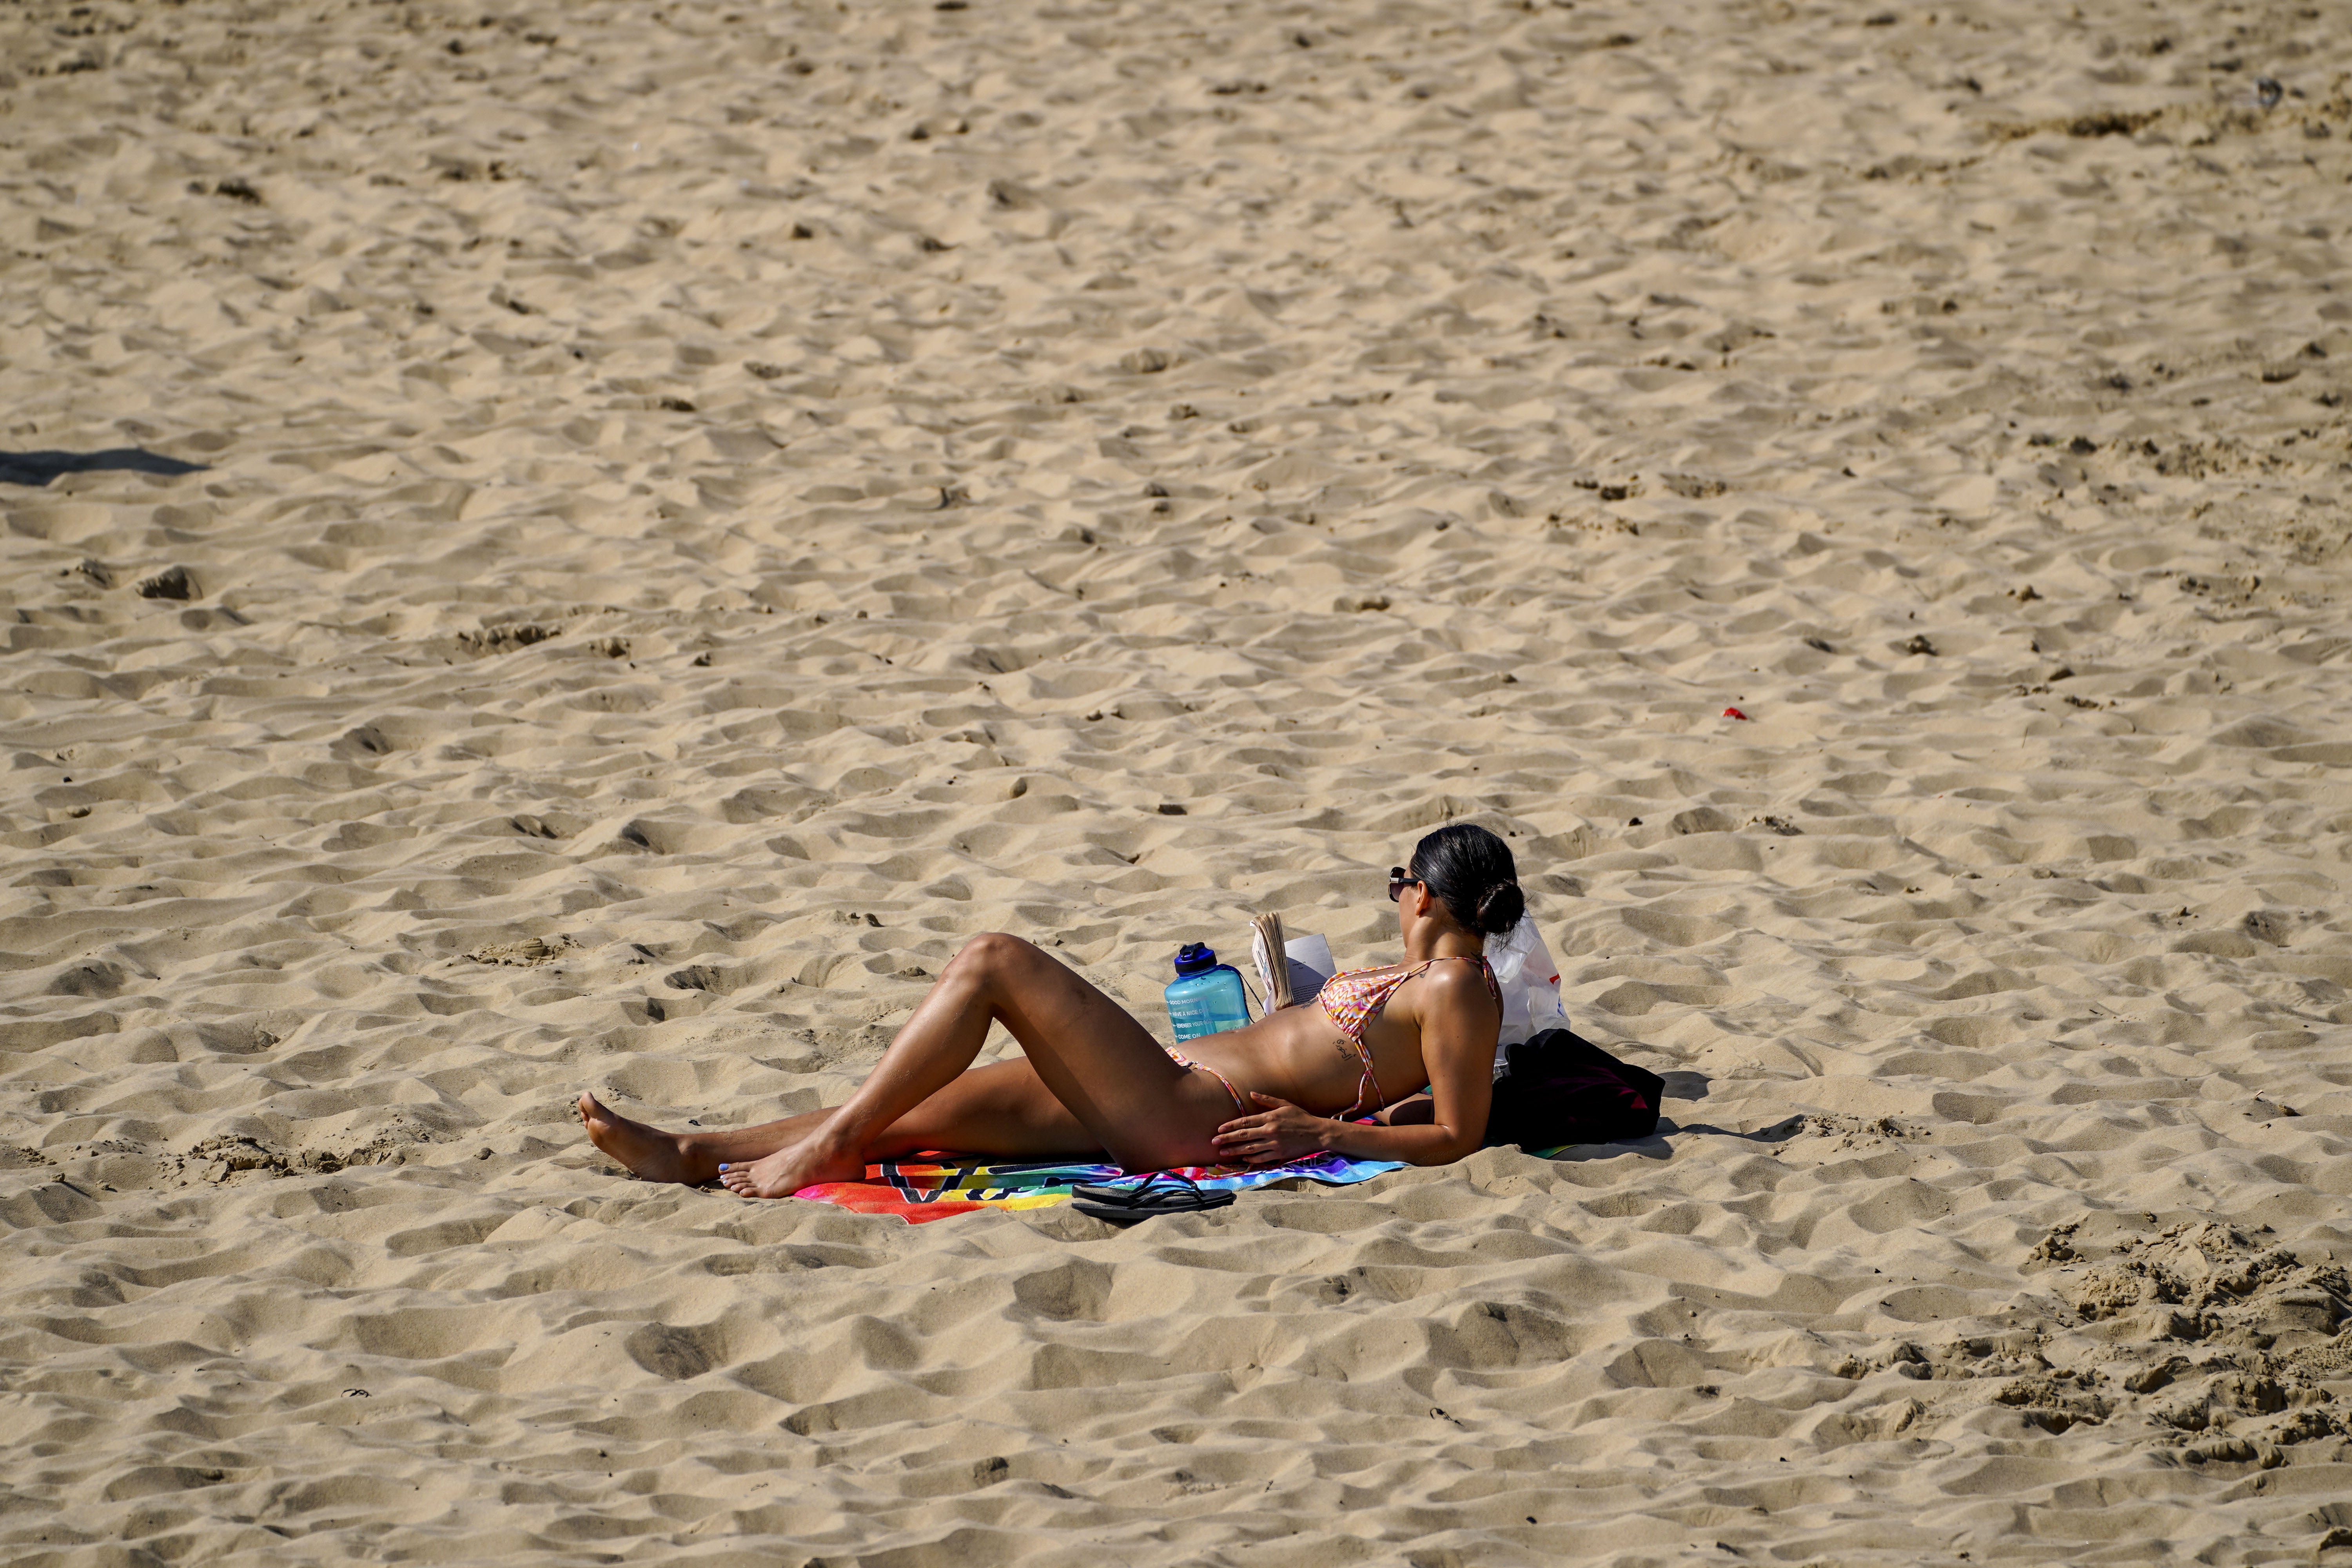 A sunbather enjoys the Mother’s Day sunshine in Bournemouth, Dorset (Steve Parsons/PA).